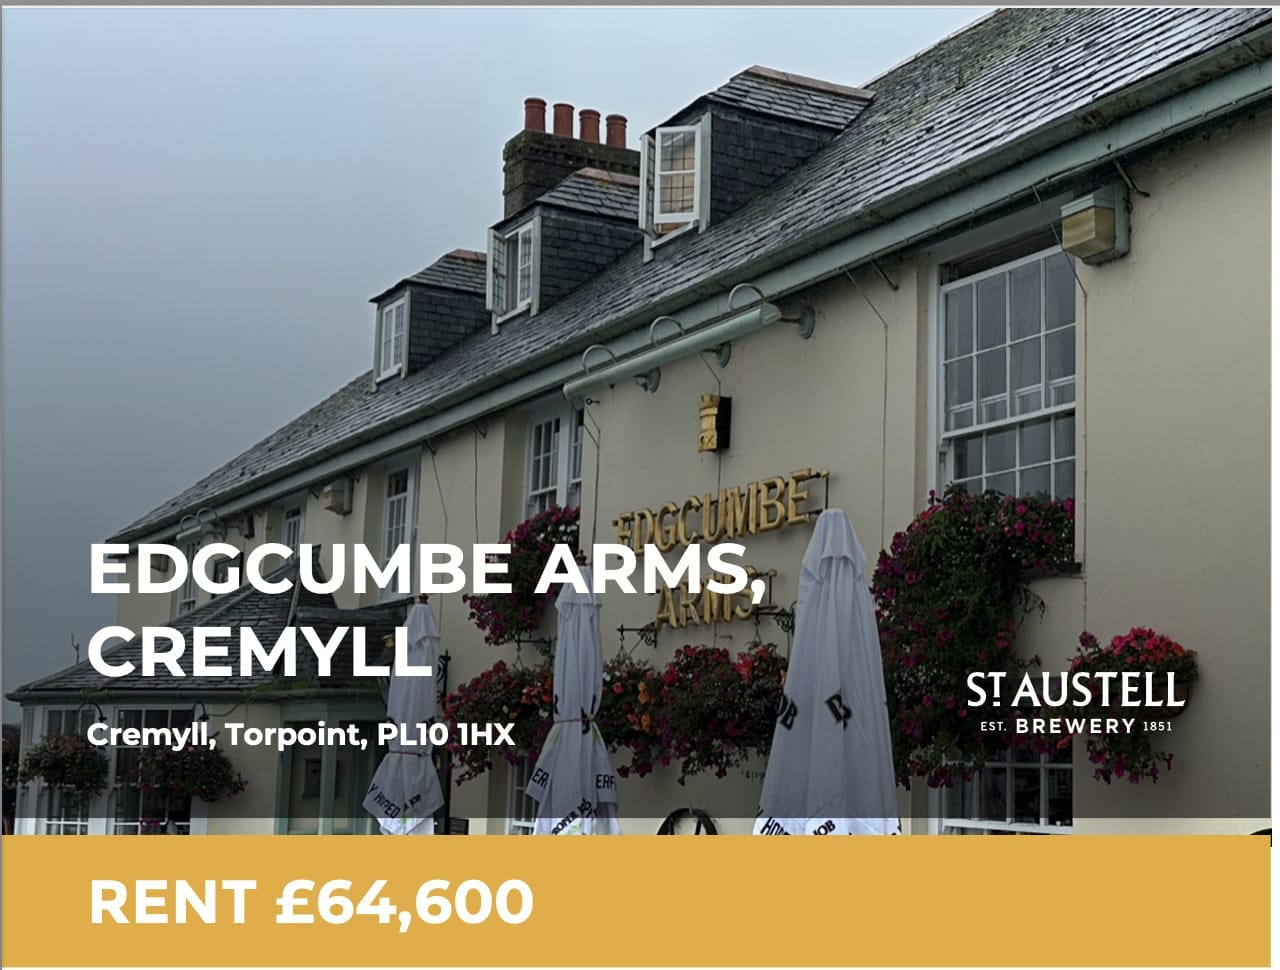 Let A Pub In Cremyll – Run The Edgcumbe Arms !